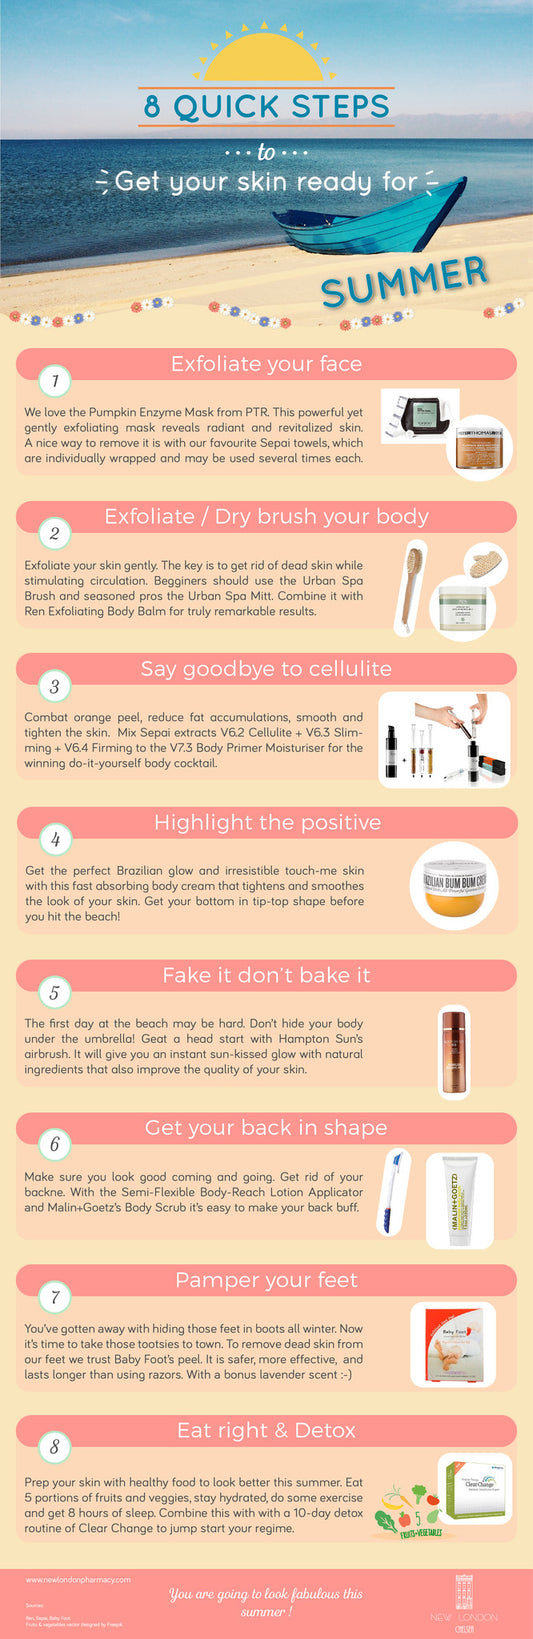 8 Quick Steps to Get Your Skin Ready for Summer